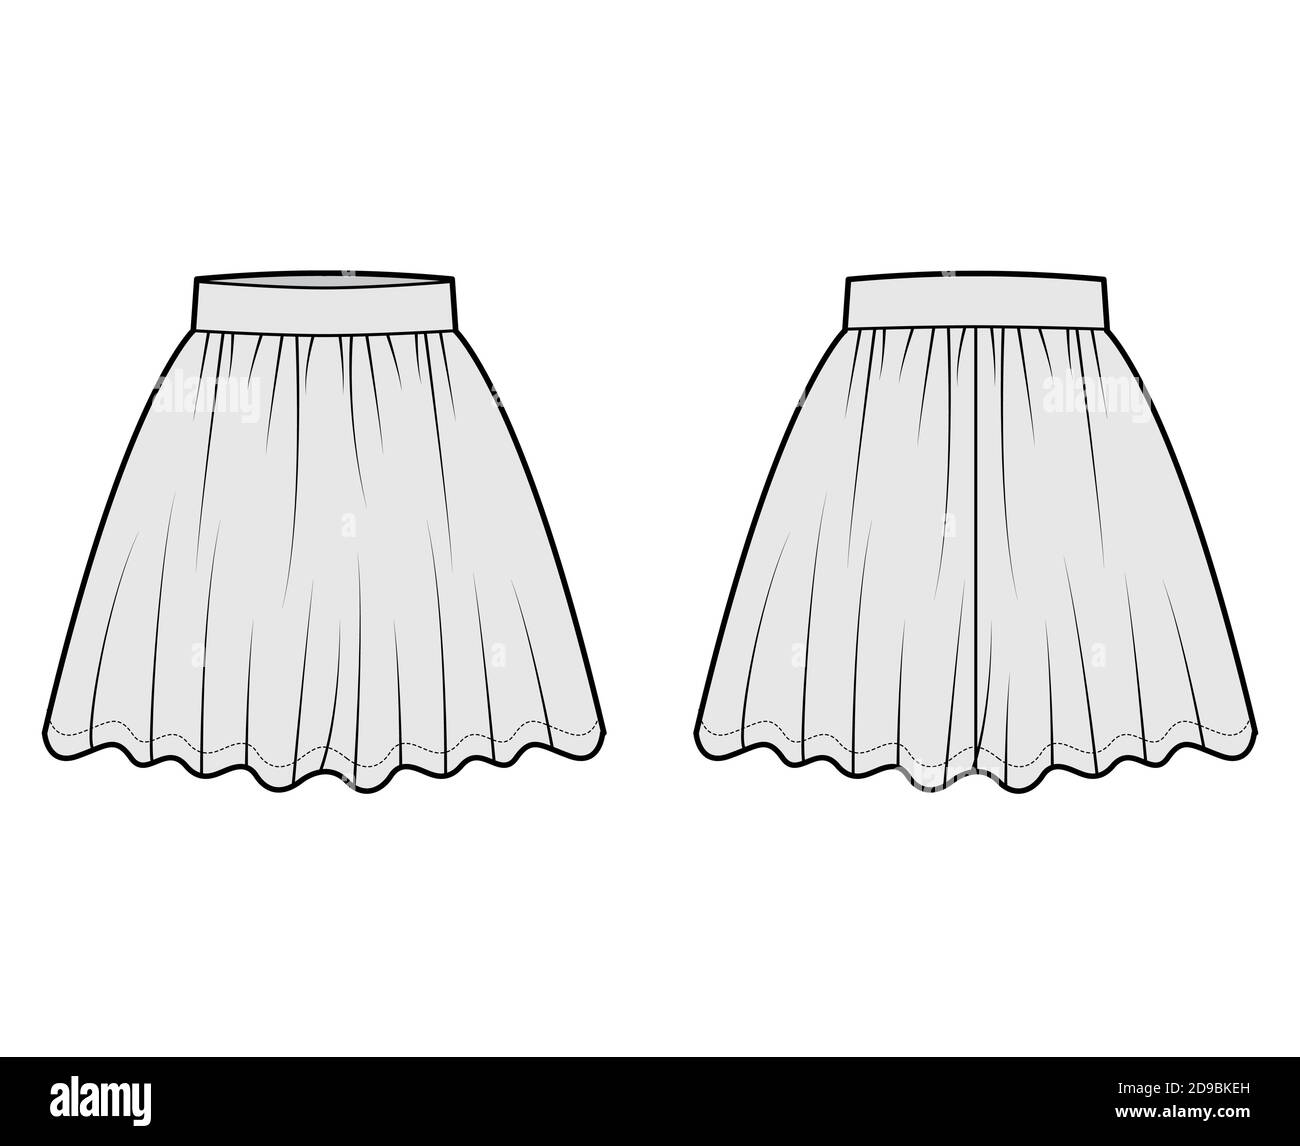 Skirt dirndl technical fashion illustration with above-the-knee lengths ...